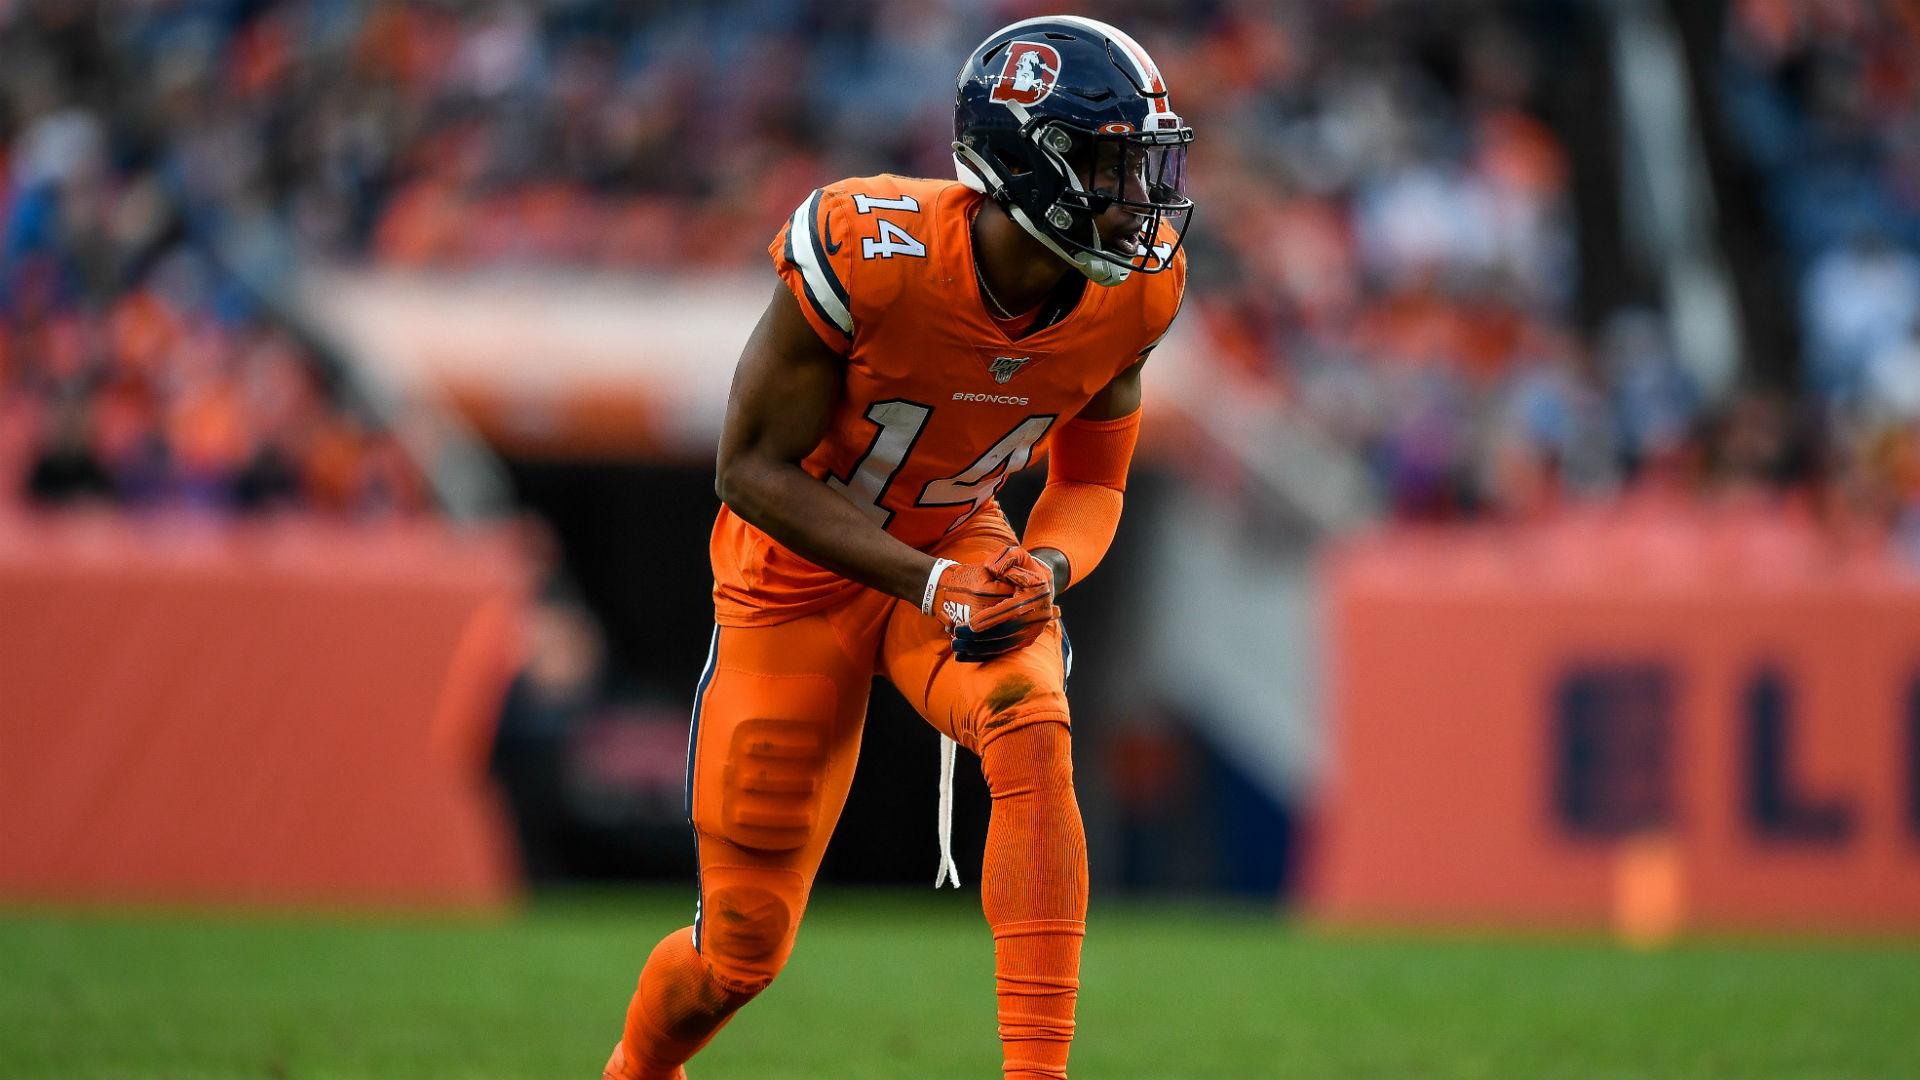 Denver Broncos have received calls about WR Courtland Sutton but have no plans to trade him